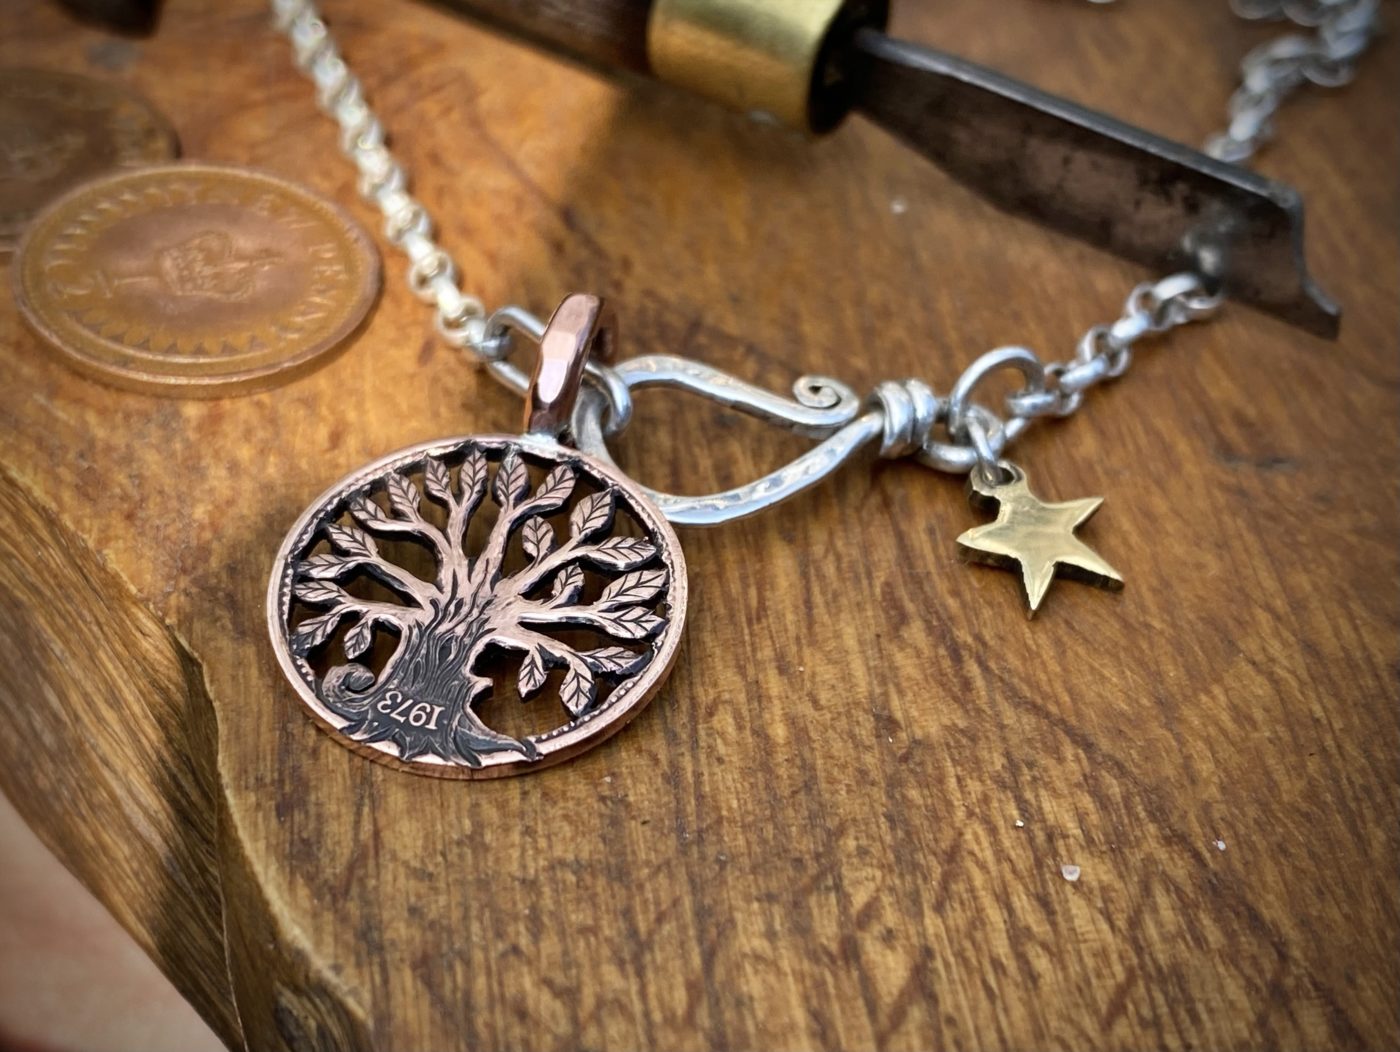 handmade and upcycled Strawberry Moon tree of life coin necklace pendant made from a British half penny perfect 40th or 50th special birthday gift idea